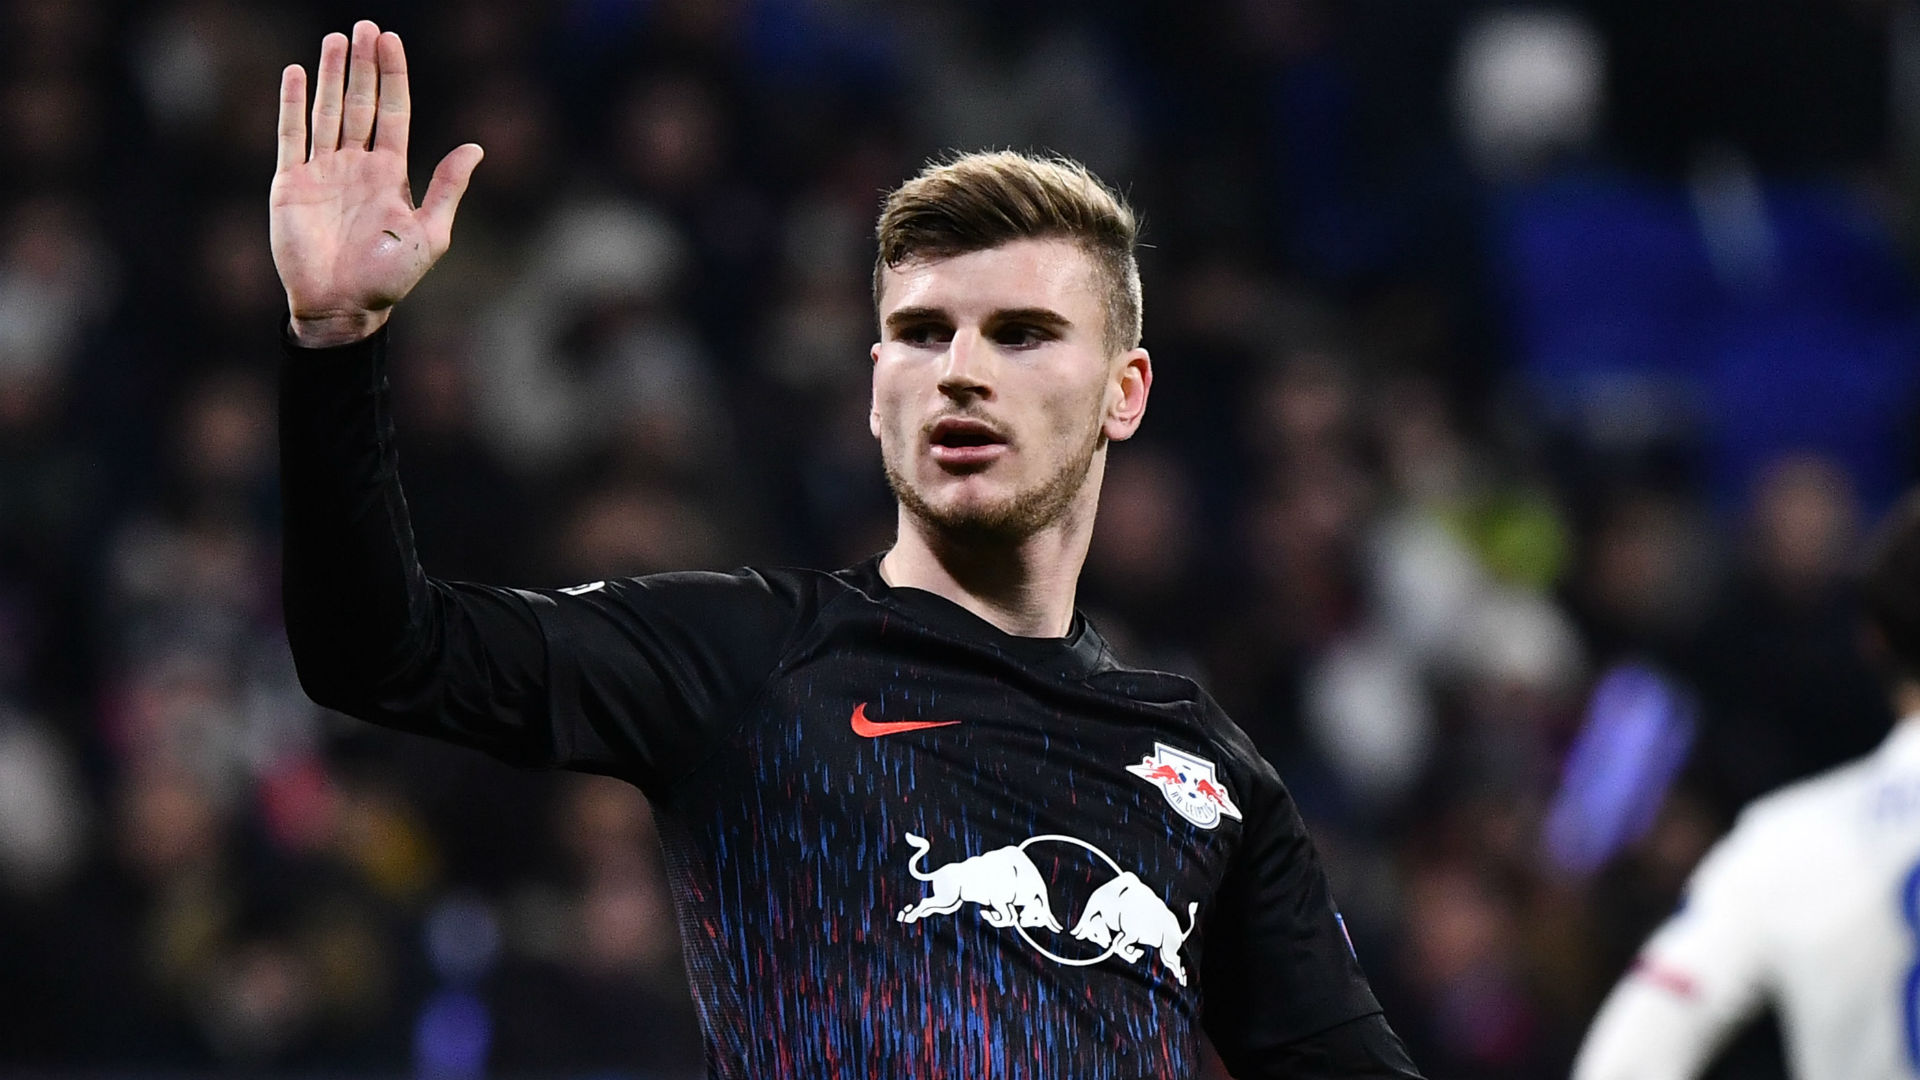 RB Leipzig star Timo Werner seems to be moving closer to a switch to Liverpool.